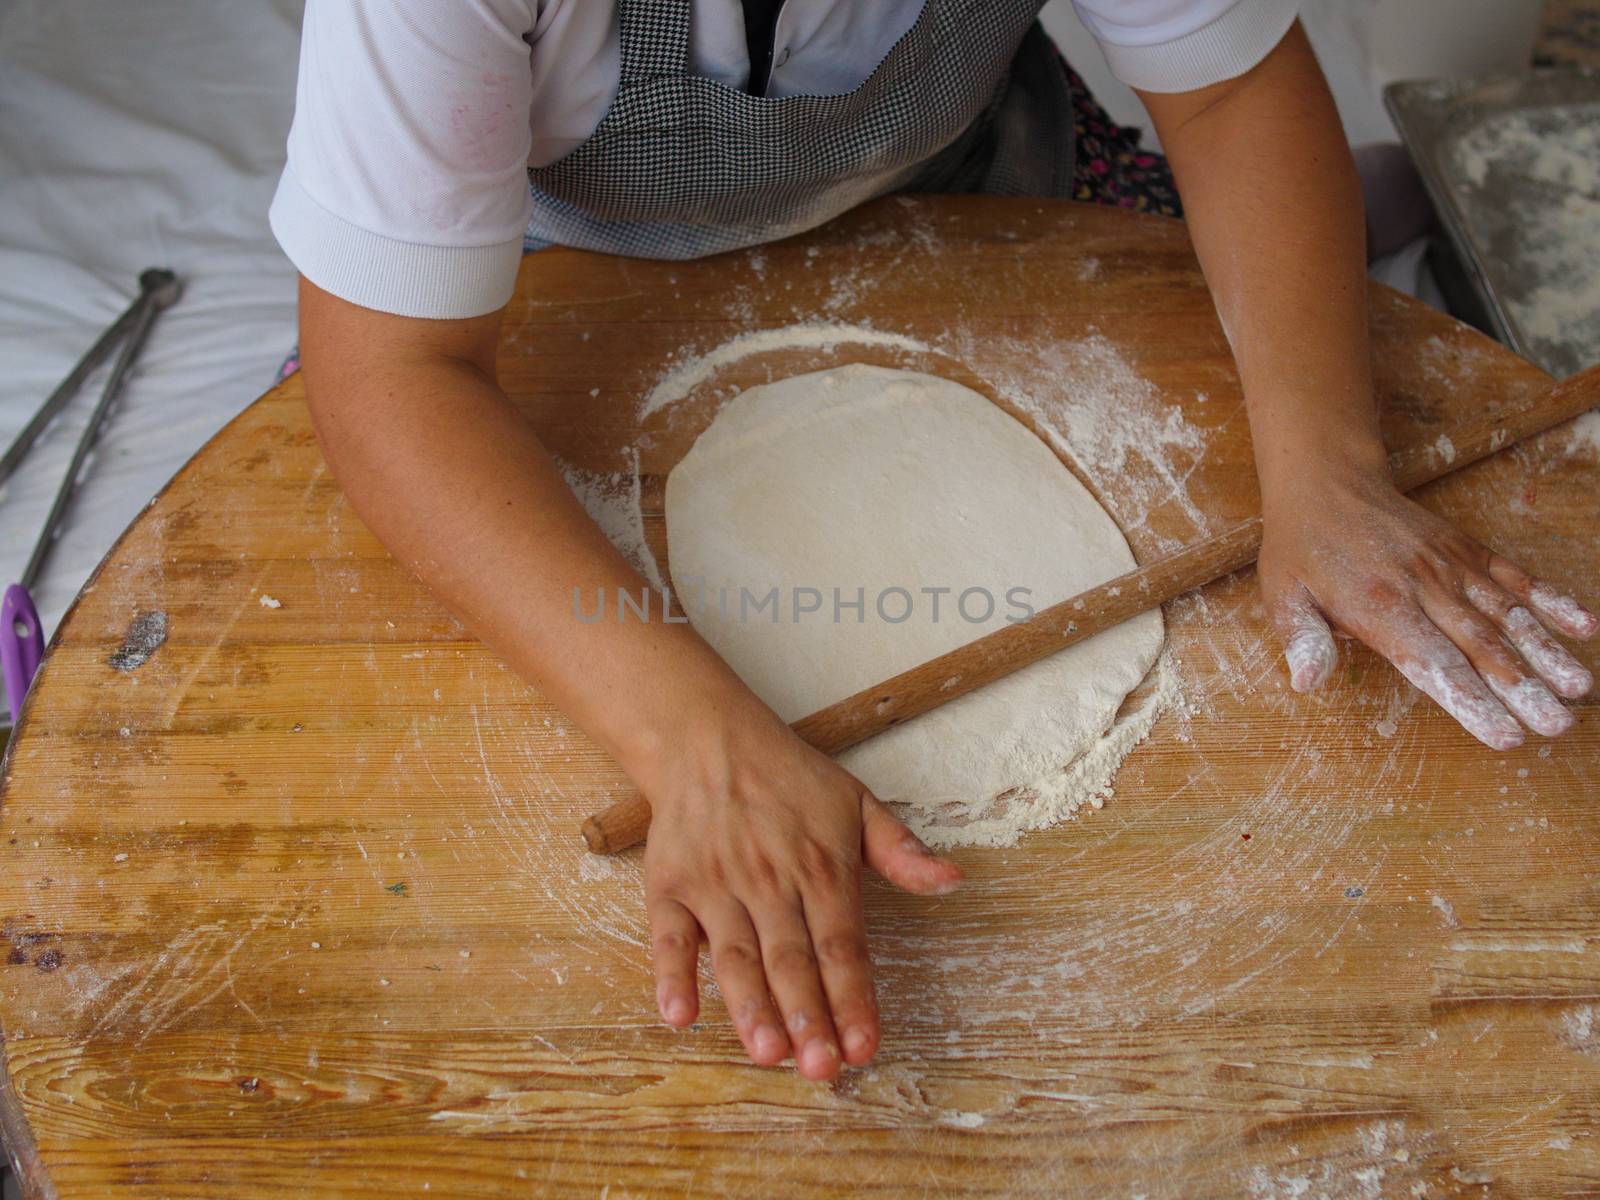 woman who makes "bazlama" and "yufka". raw dough opens with rolling pin